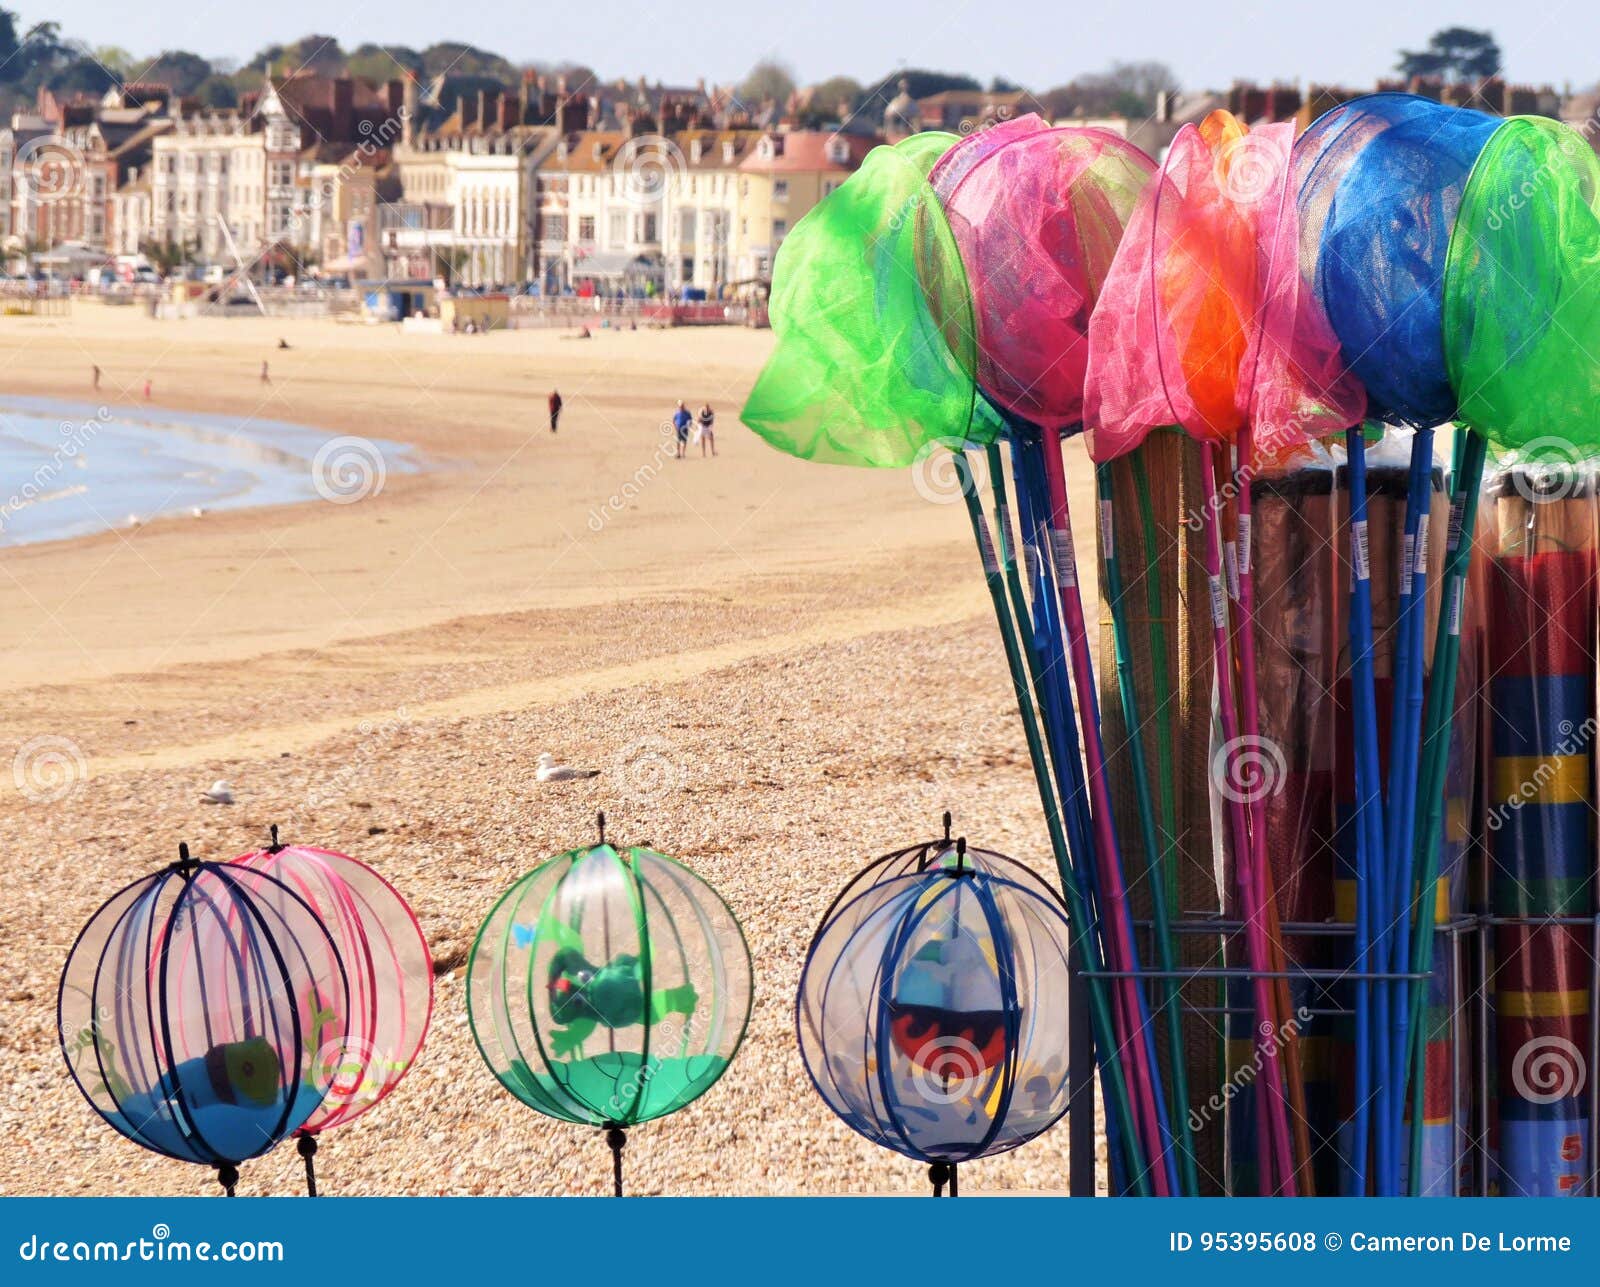 https://thumbs.dreamstime.com/z/kids-beach-essentials-weymouth-front-fishing-nets-inquisitive-nature-loving-minds-95395608.jpg